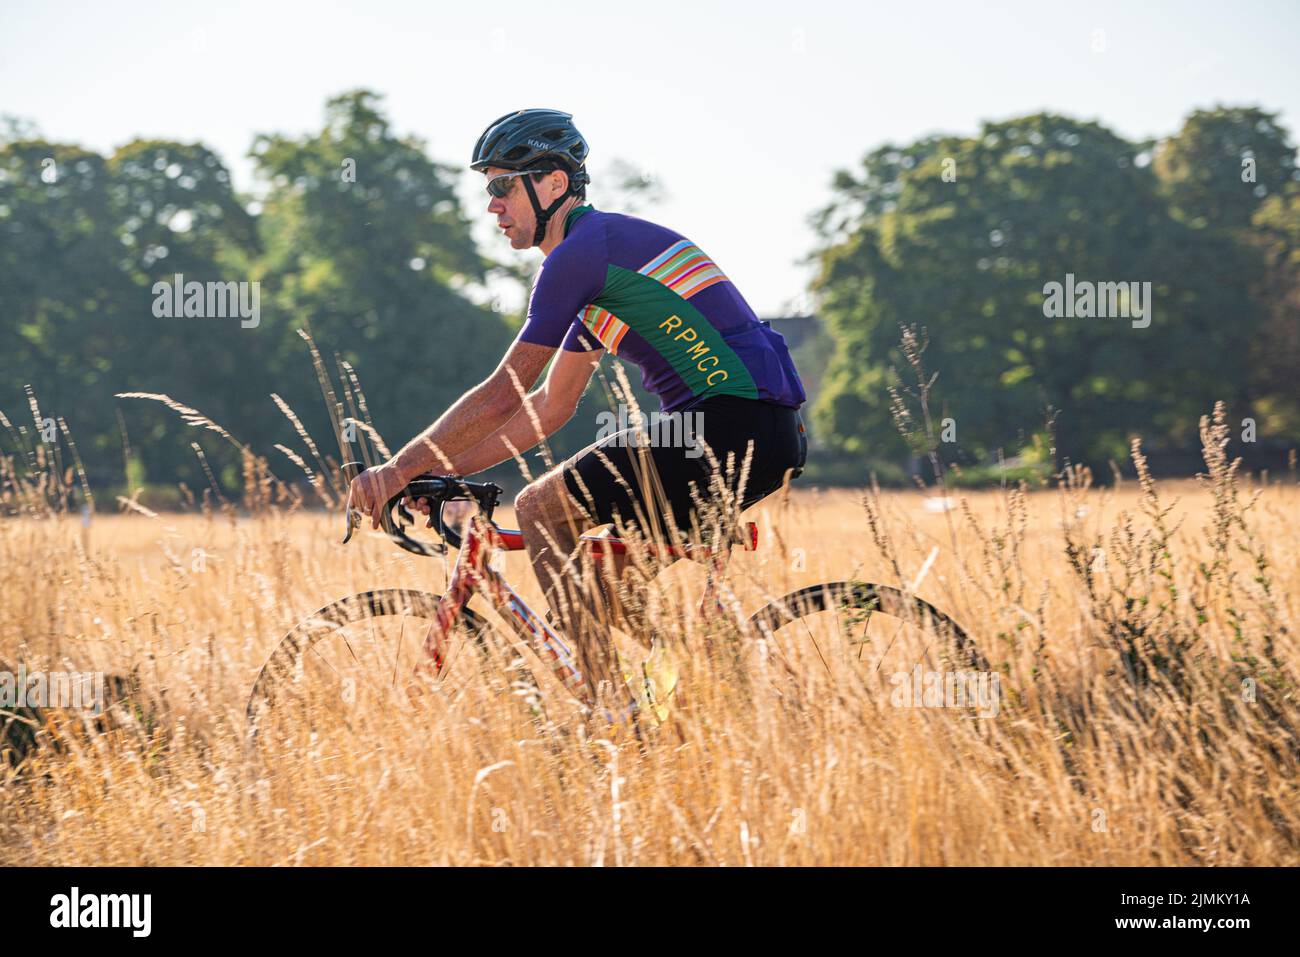 Wimbledon, London, UK. 7 August 2022  A cyclist riding  in the bright sunshine this morning through the parched Wimbledon Common, south west London  as the hot weather and a lack of rainfall continue to grip much of the south of England and the UK, with temperatures expected to reach  above 30celsius  by next week Credit. amer ghazzal/Alamy Live News Stock Photo